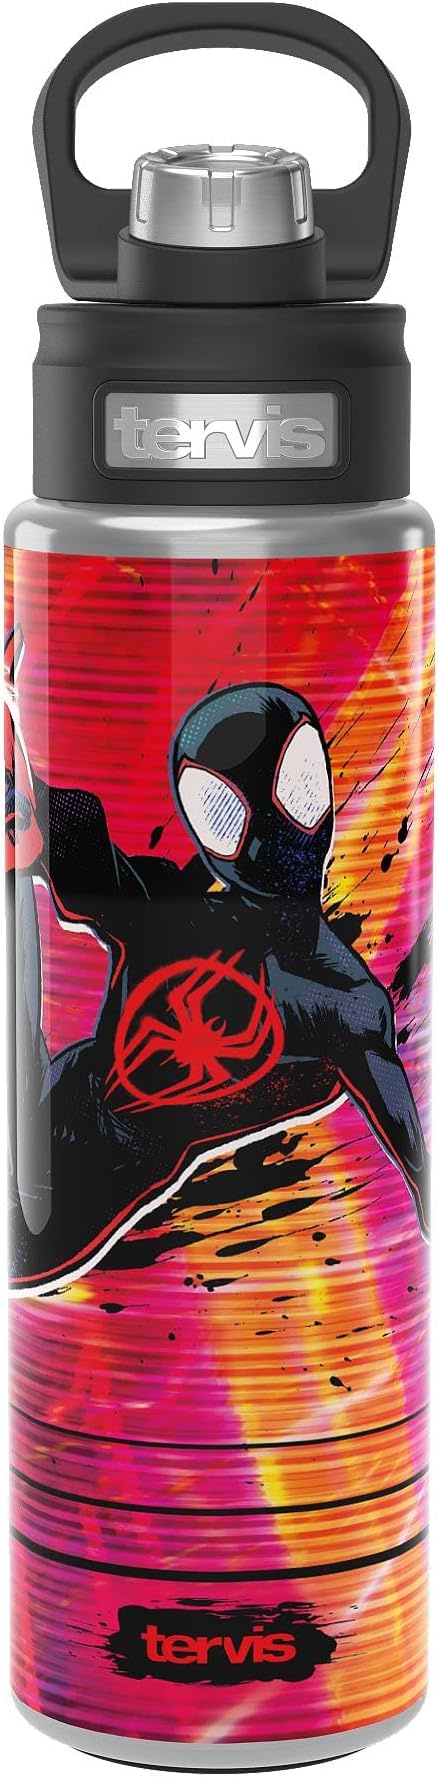 Marvel- Spider-Man  Swing Stainless Steel Wide Mouth Bottle with Deluxe Spout Lid